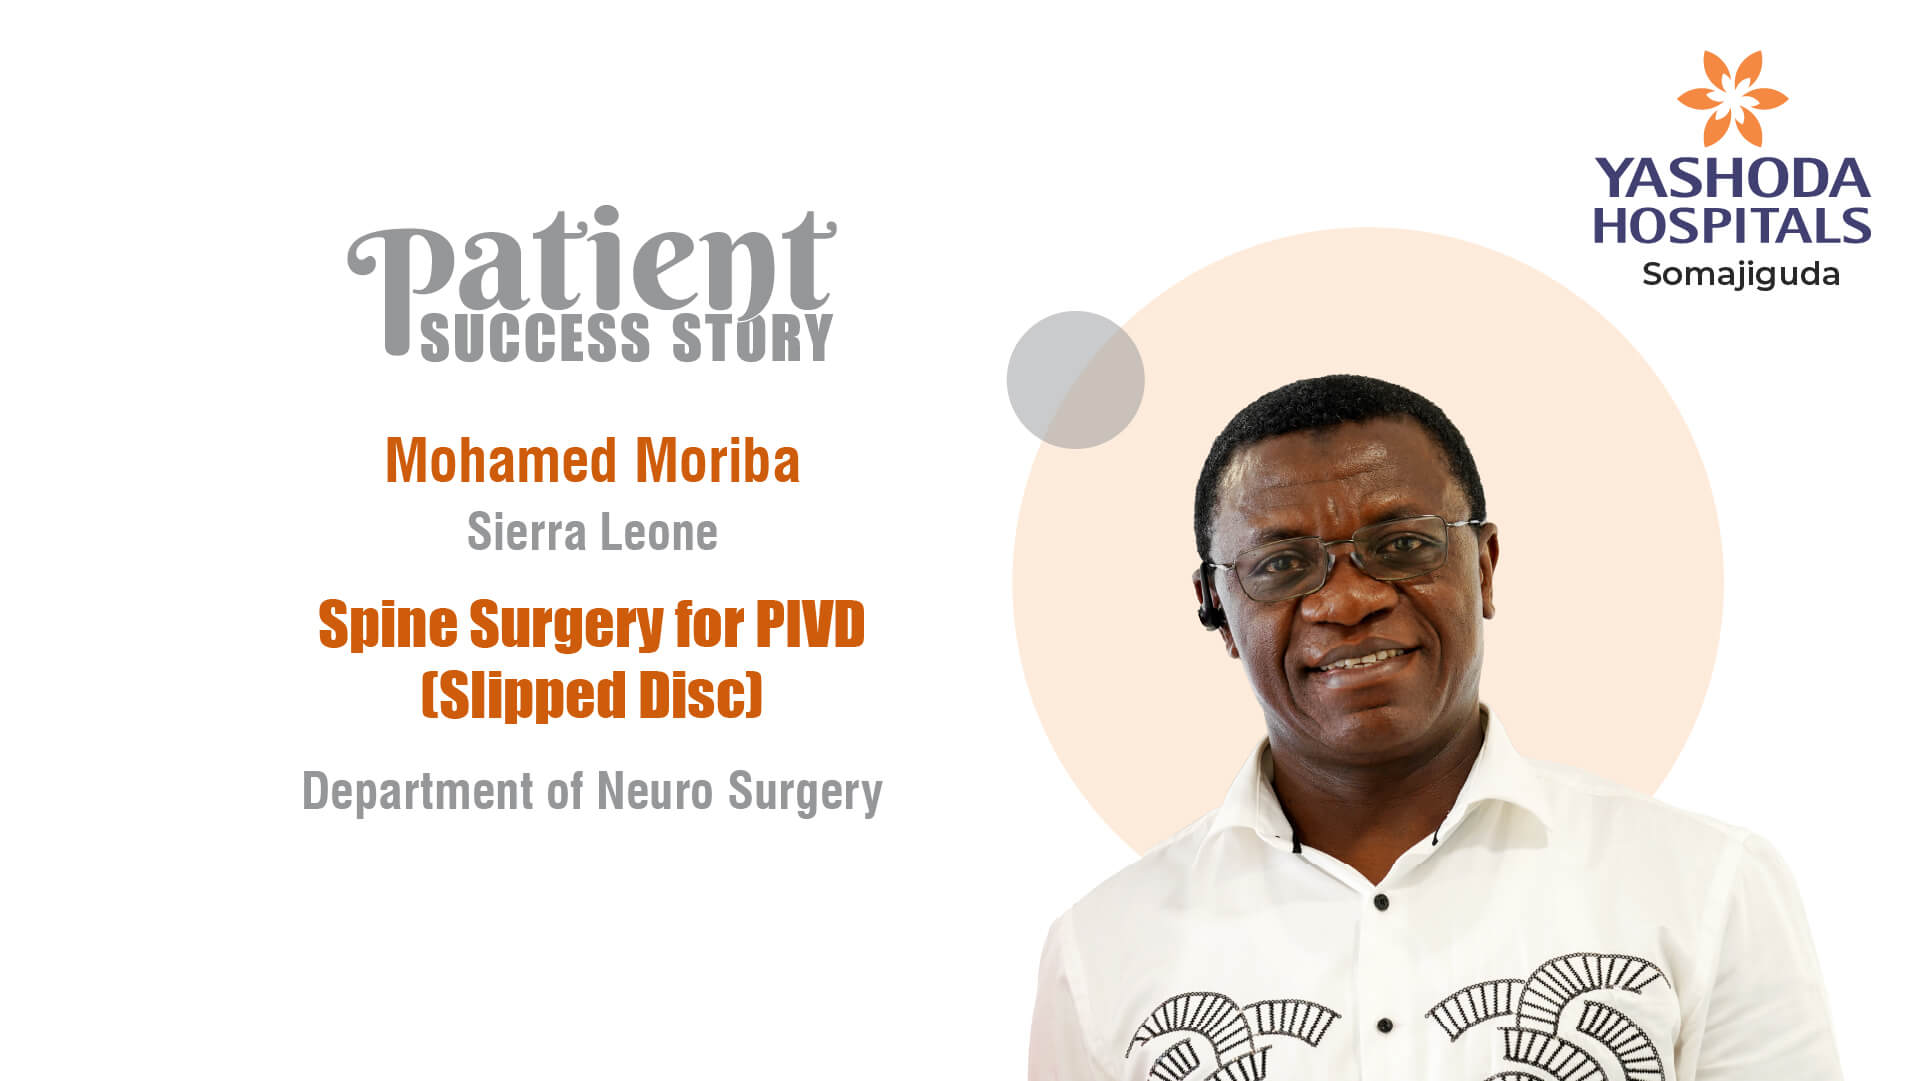 Spine Surgery for PIVD (Slipped Disc)